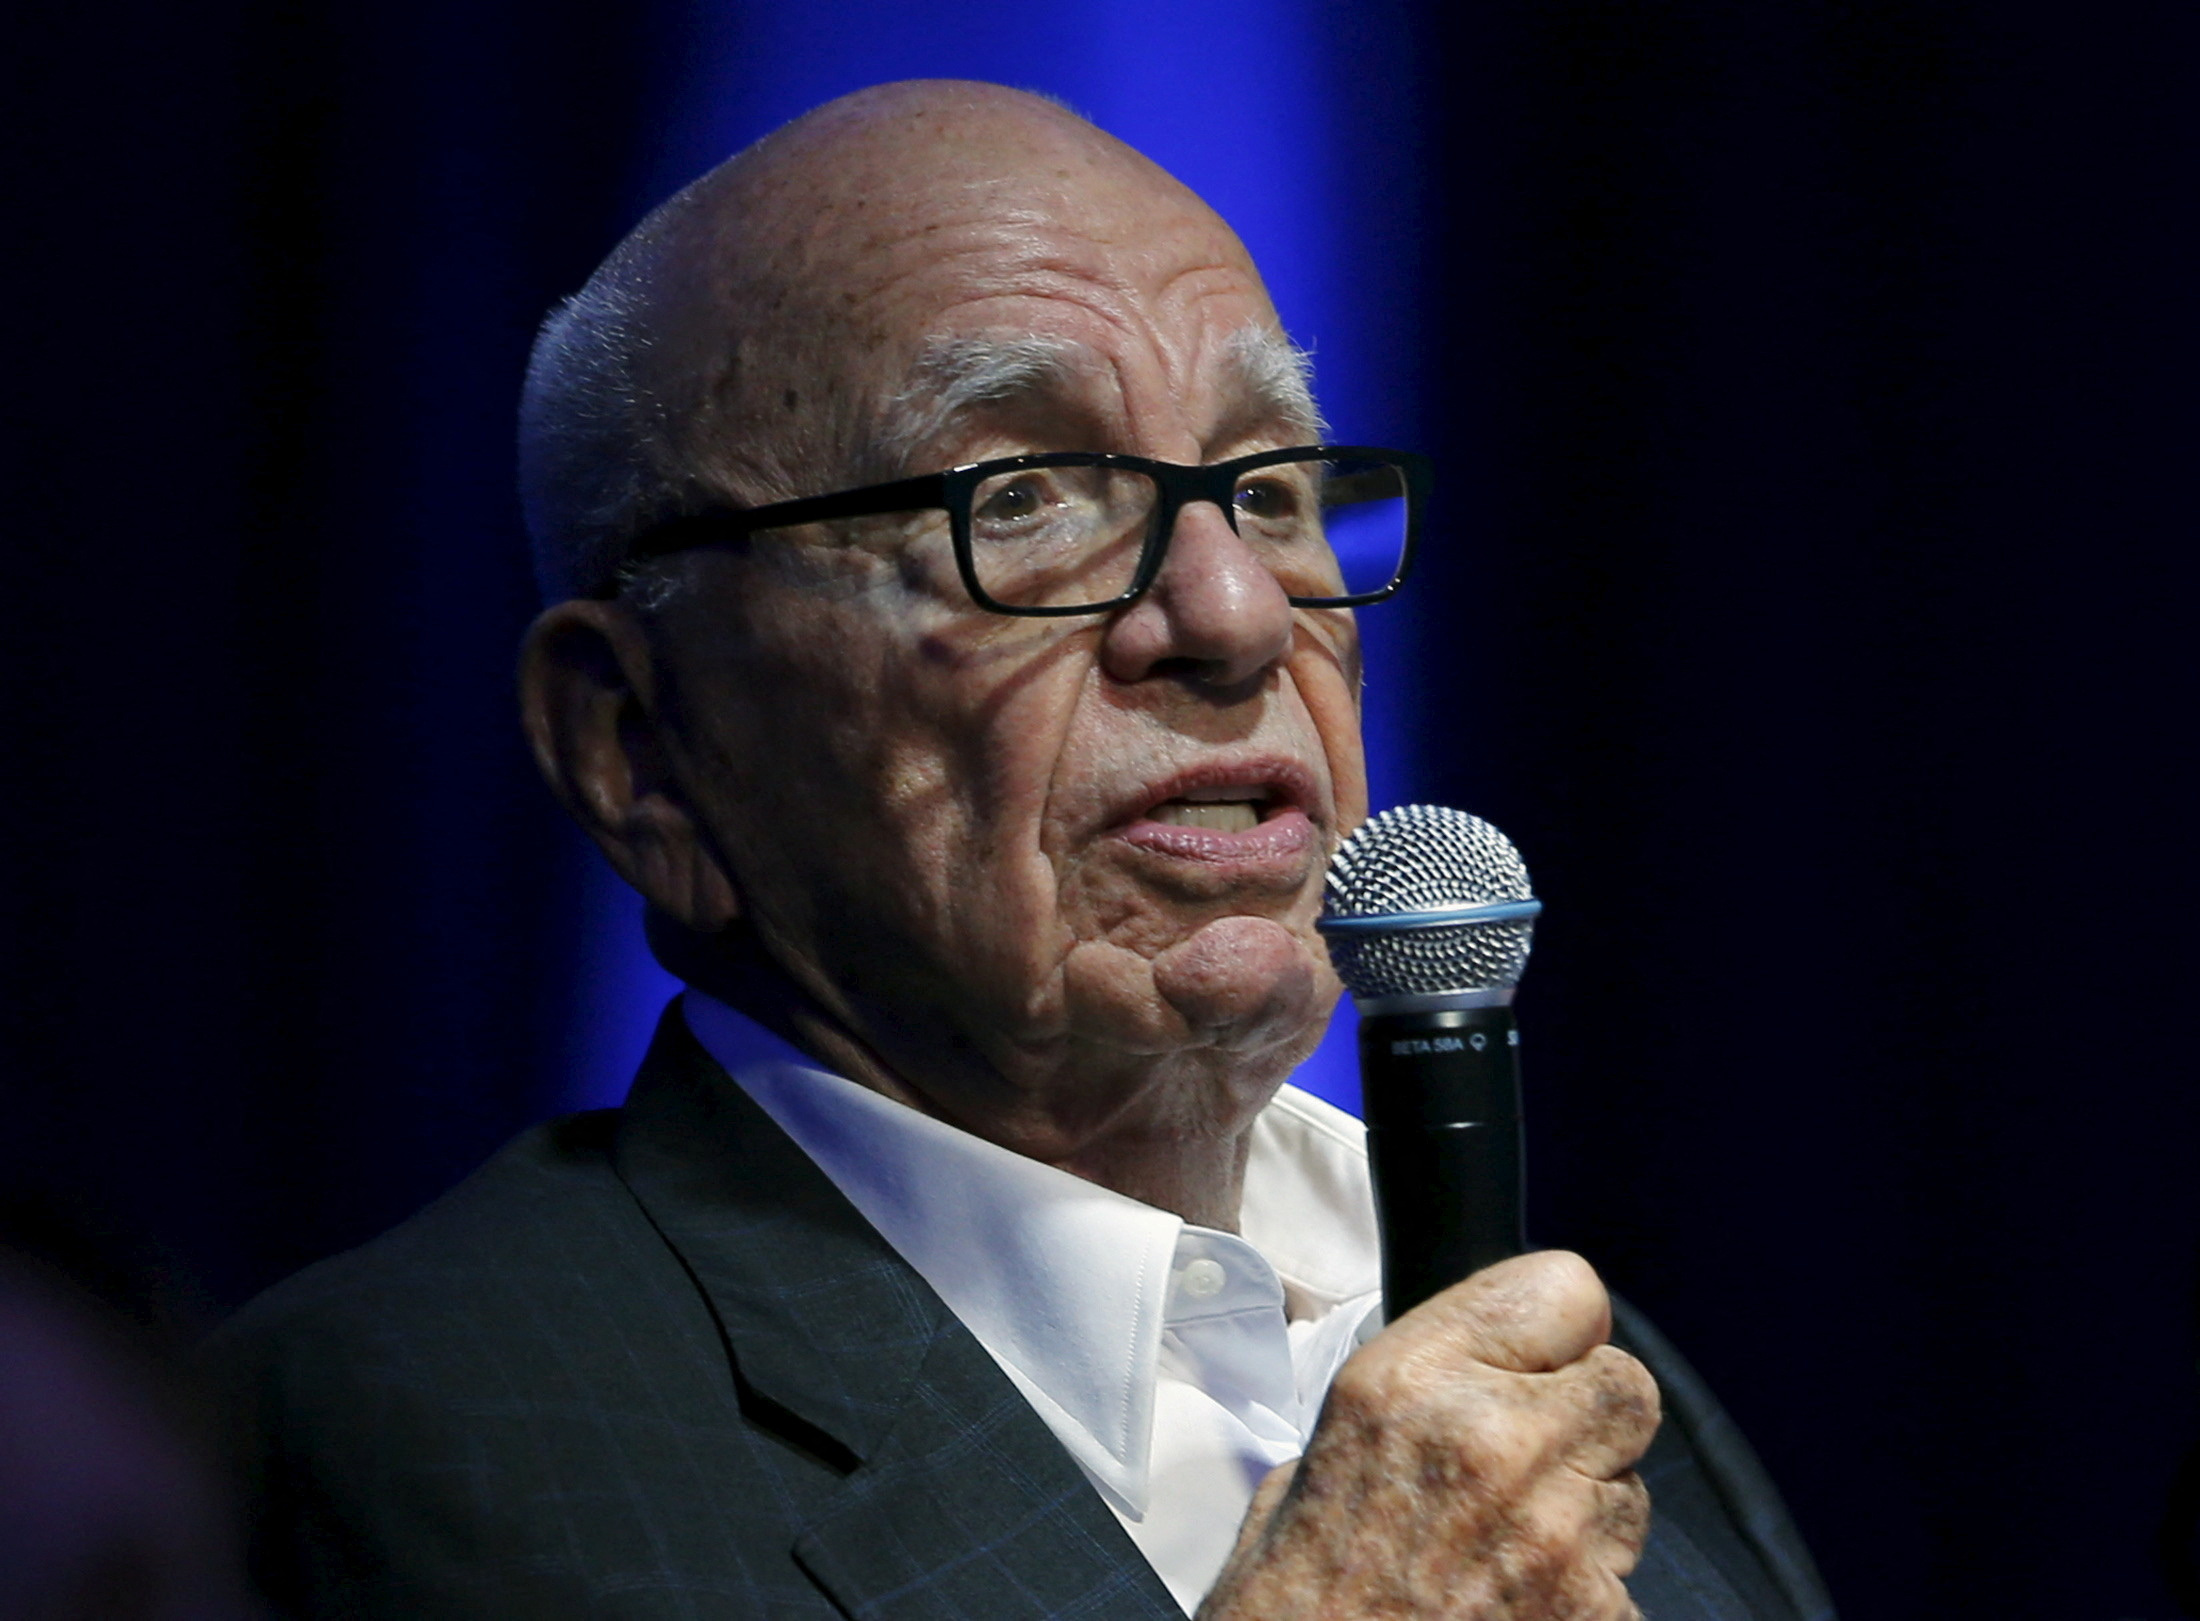 Murdoch takes part as a judge during a global start up showcase during the WSJDLive conference in Laguna Beach